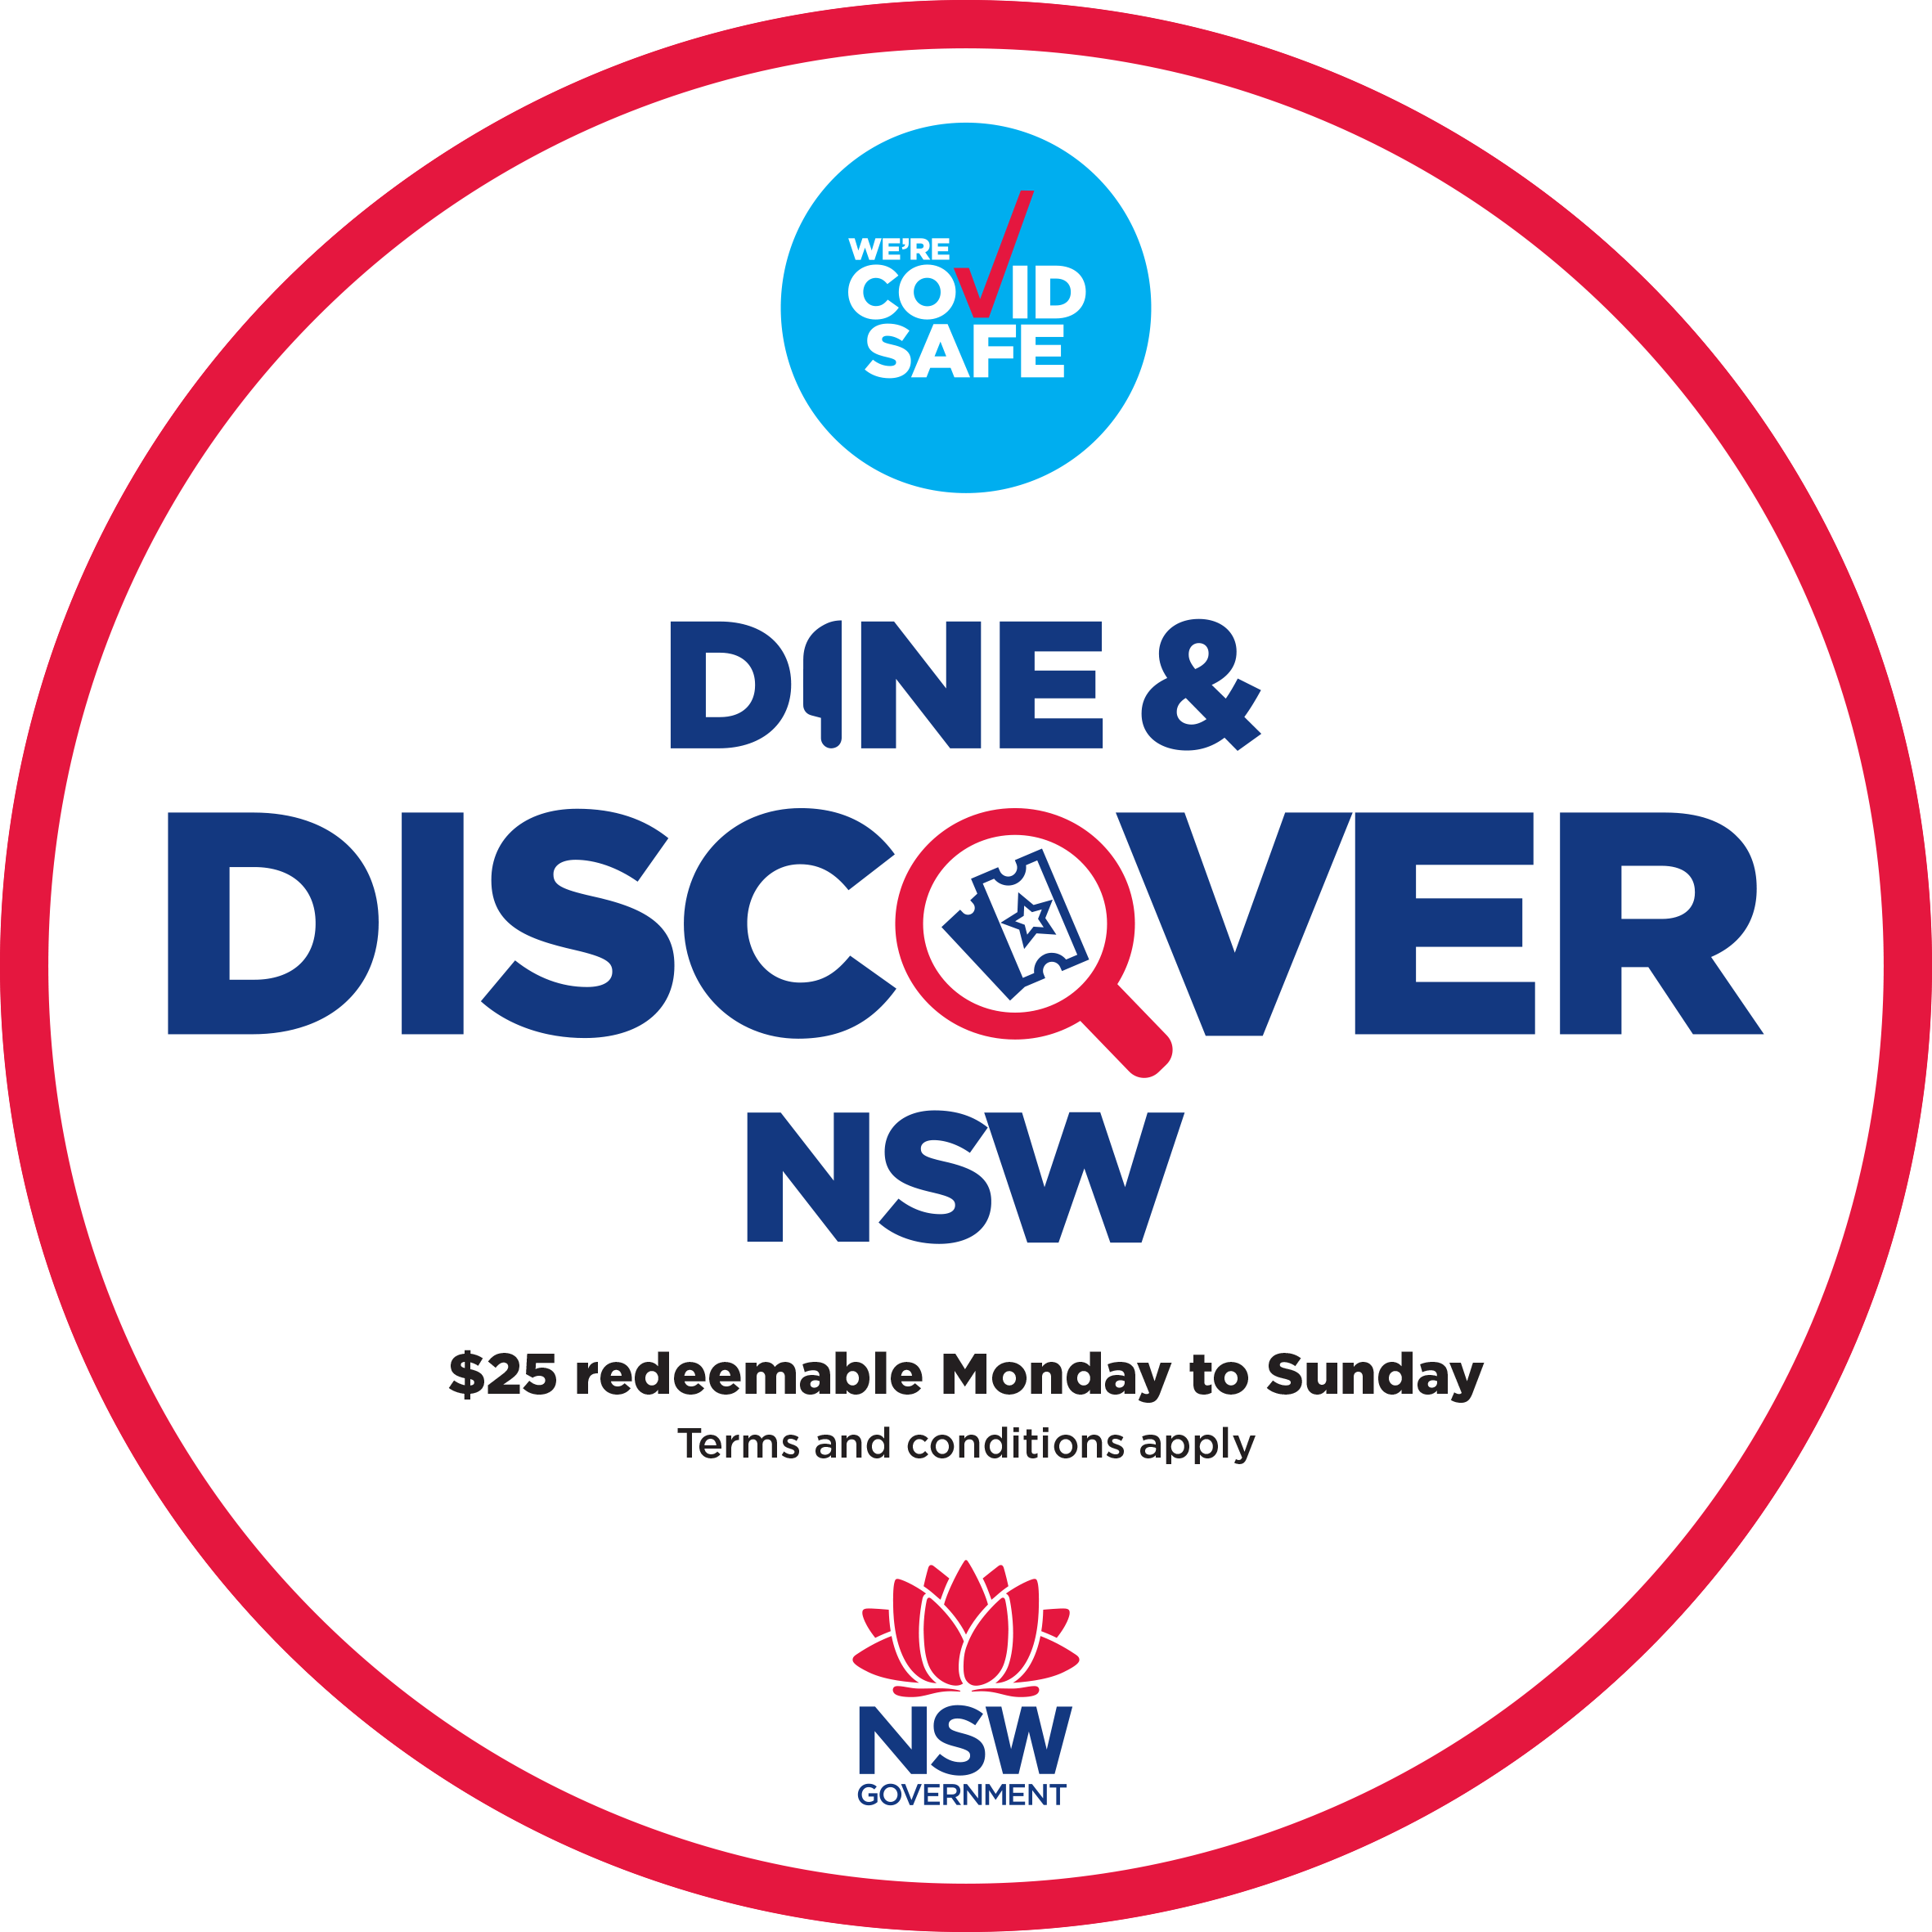 dine & discover nsw 